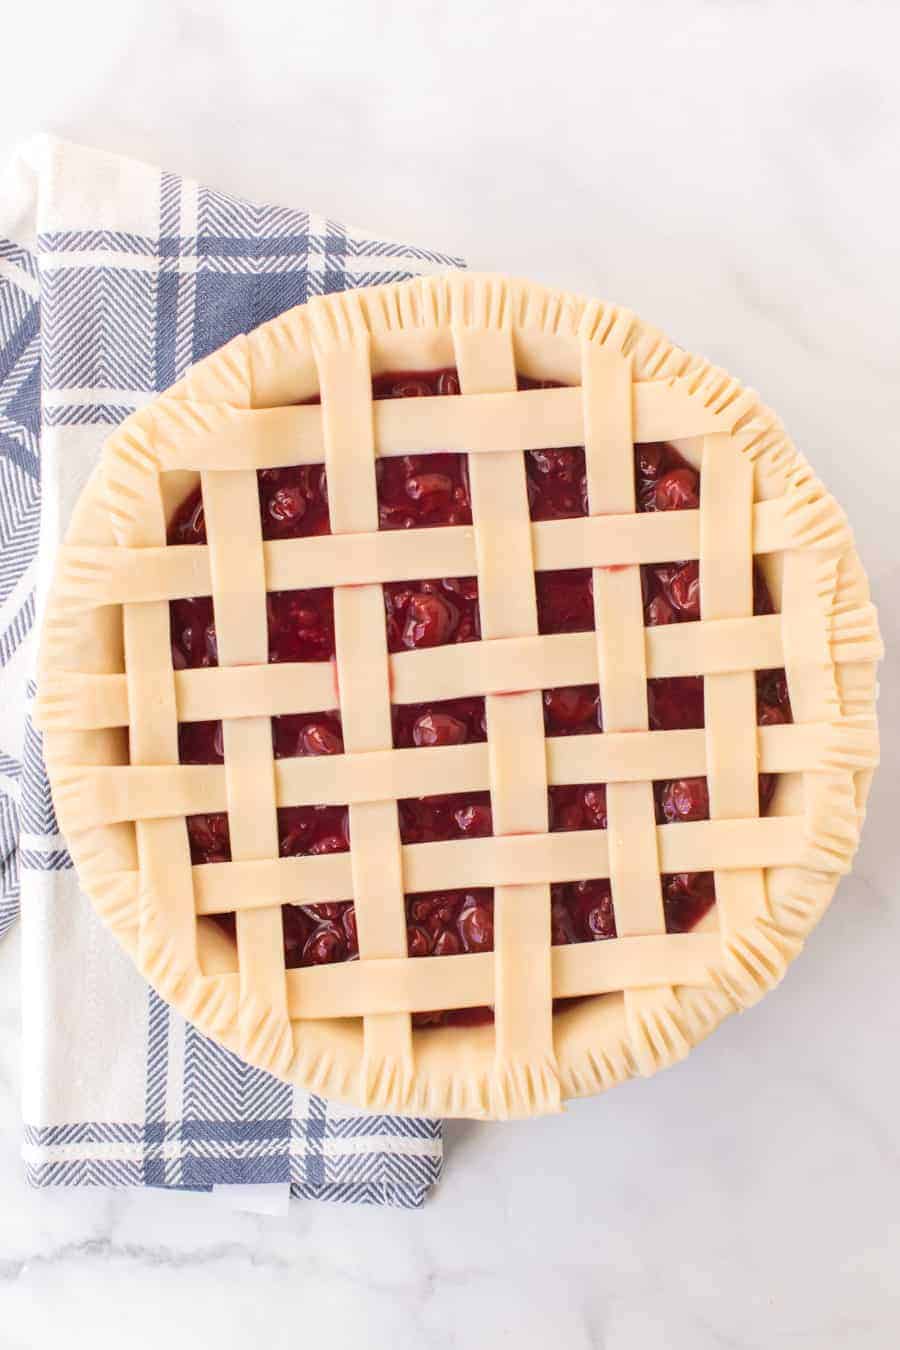 unbaked cherry pie with criss cross pie crust resting on blue and white checkered towel on white countertop